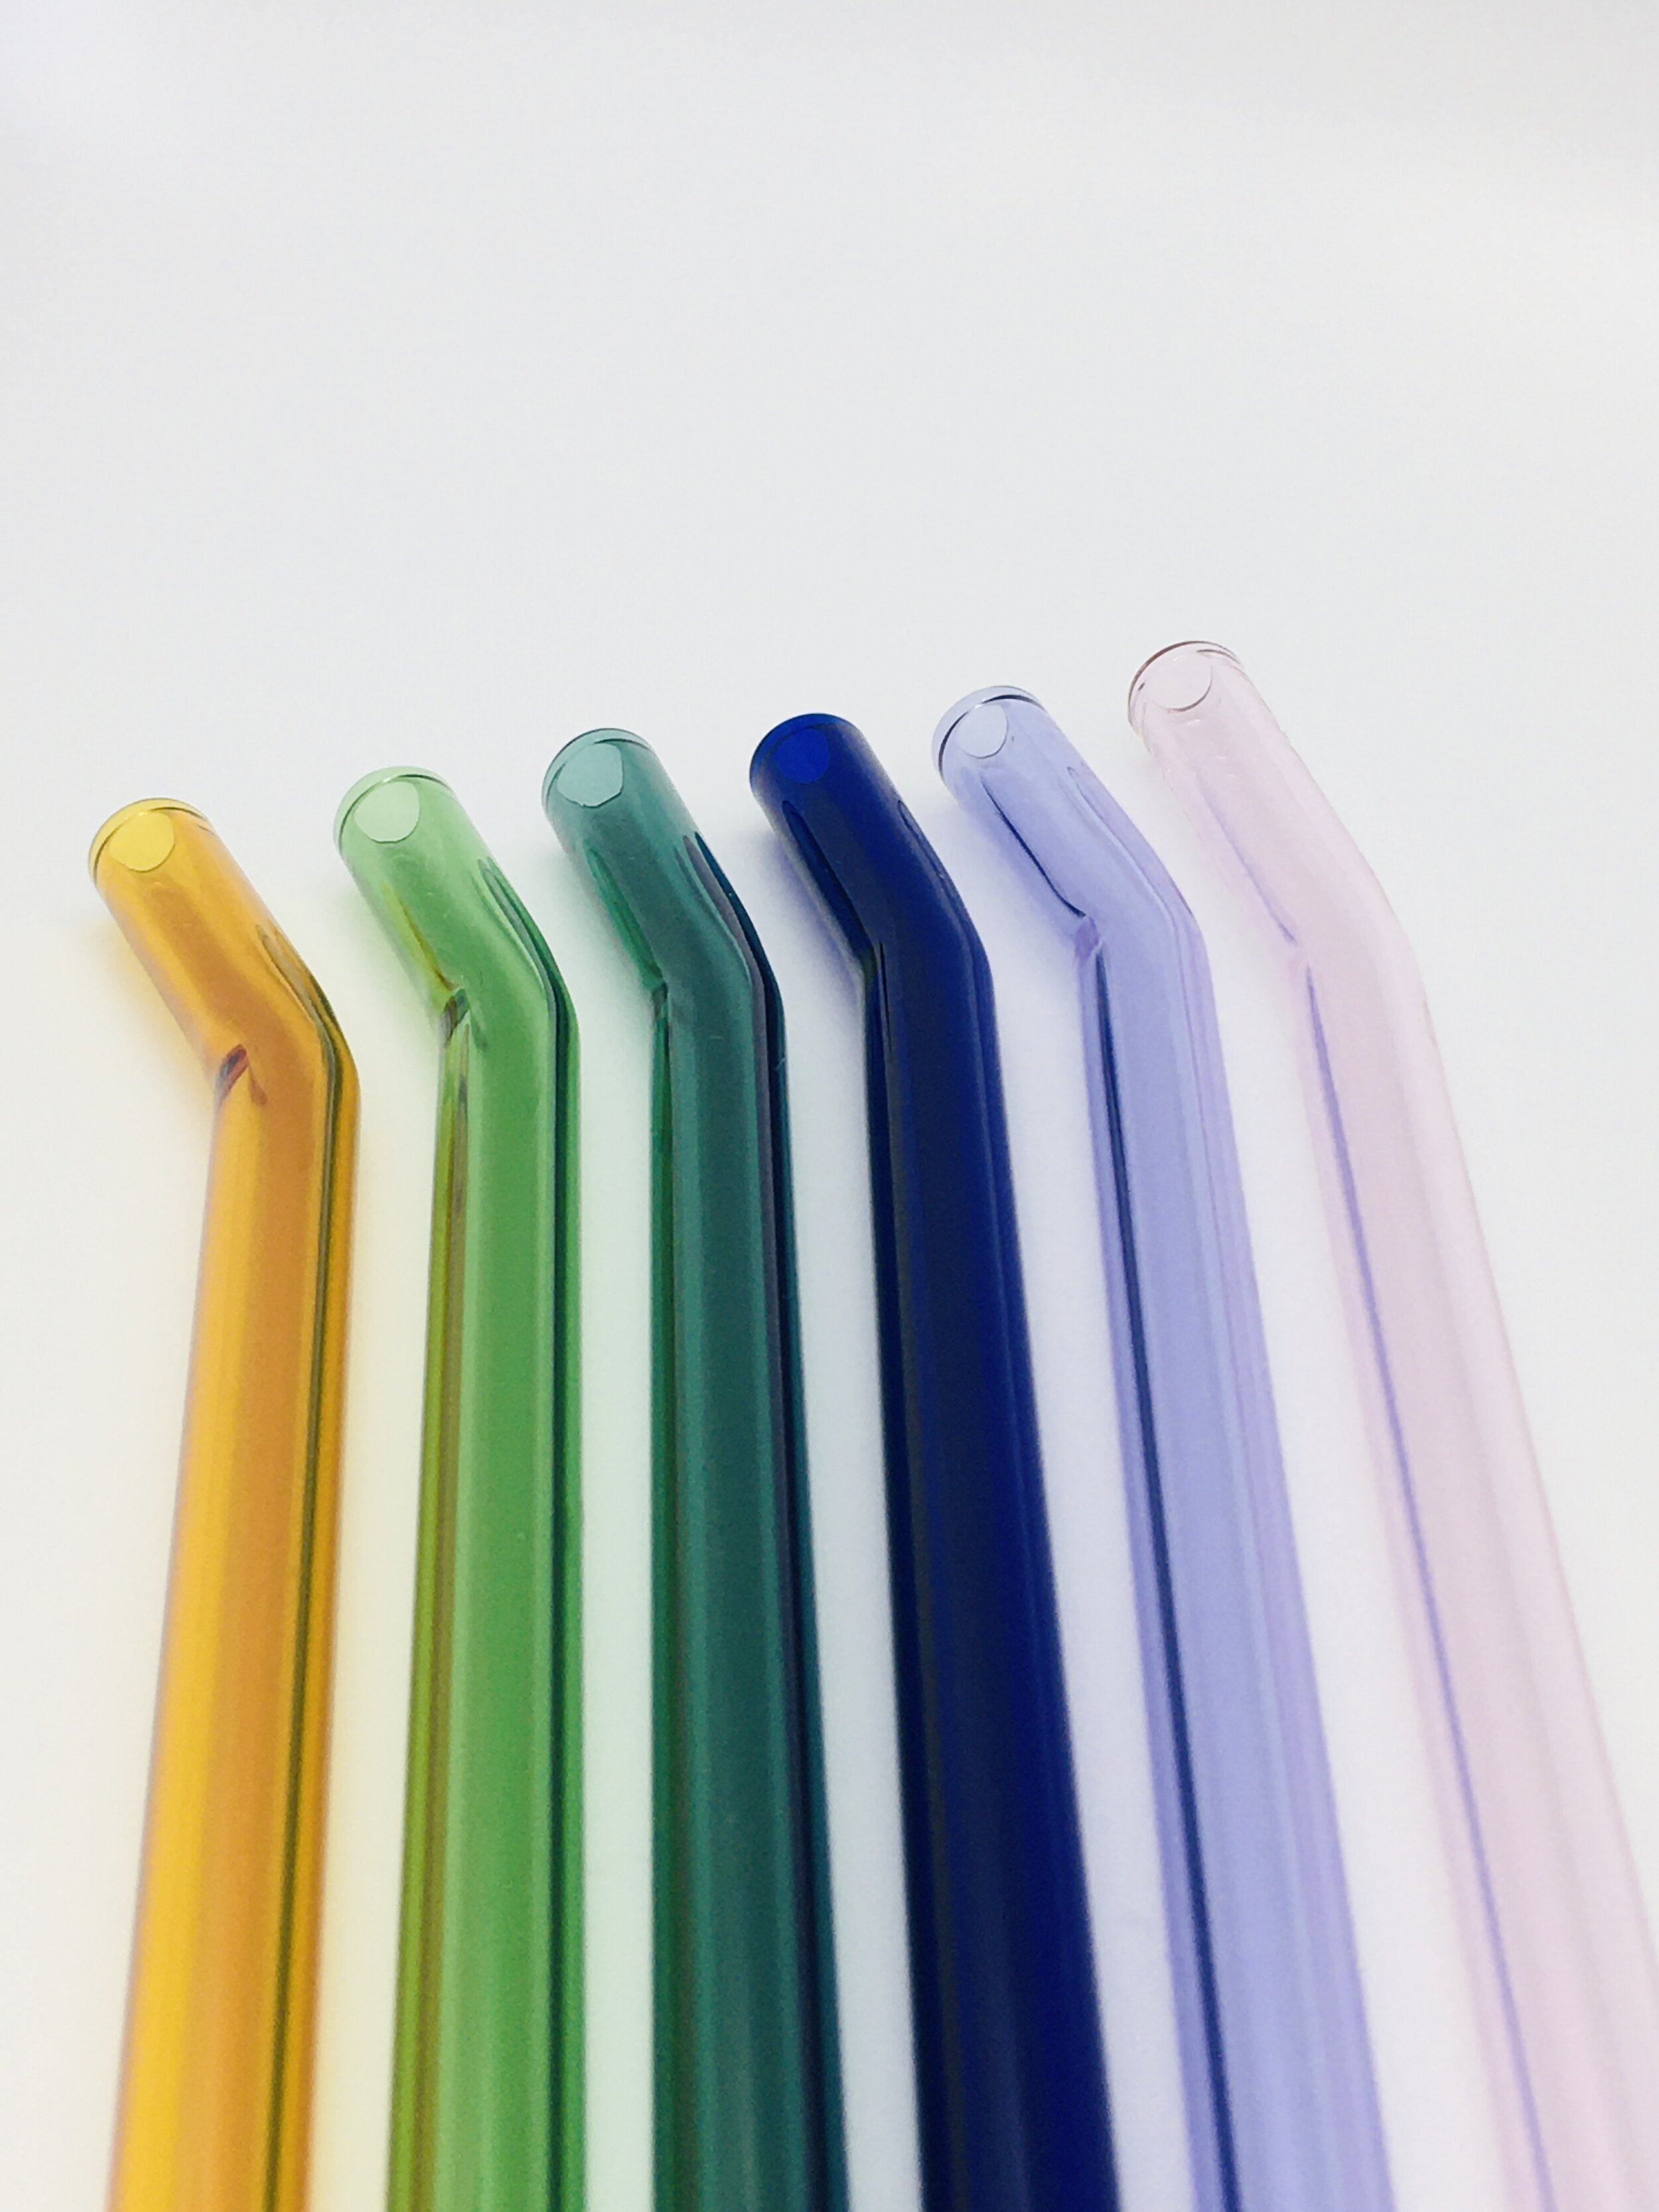 4/8 Bent Glass Straws (10 color) Reusable Drinking Straw for